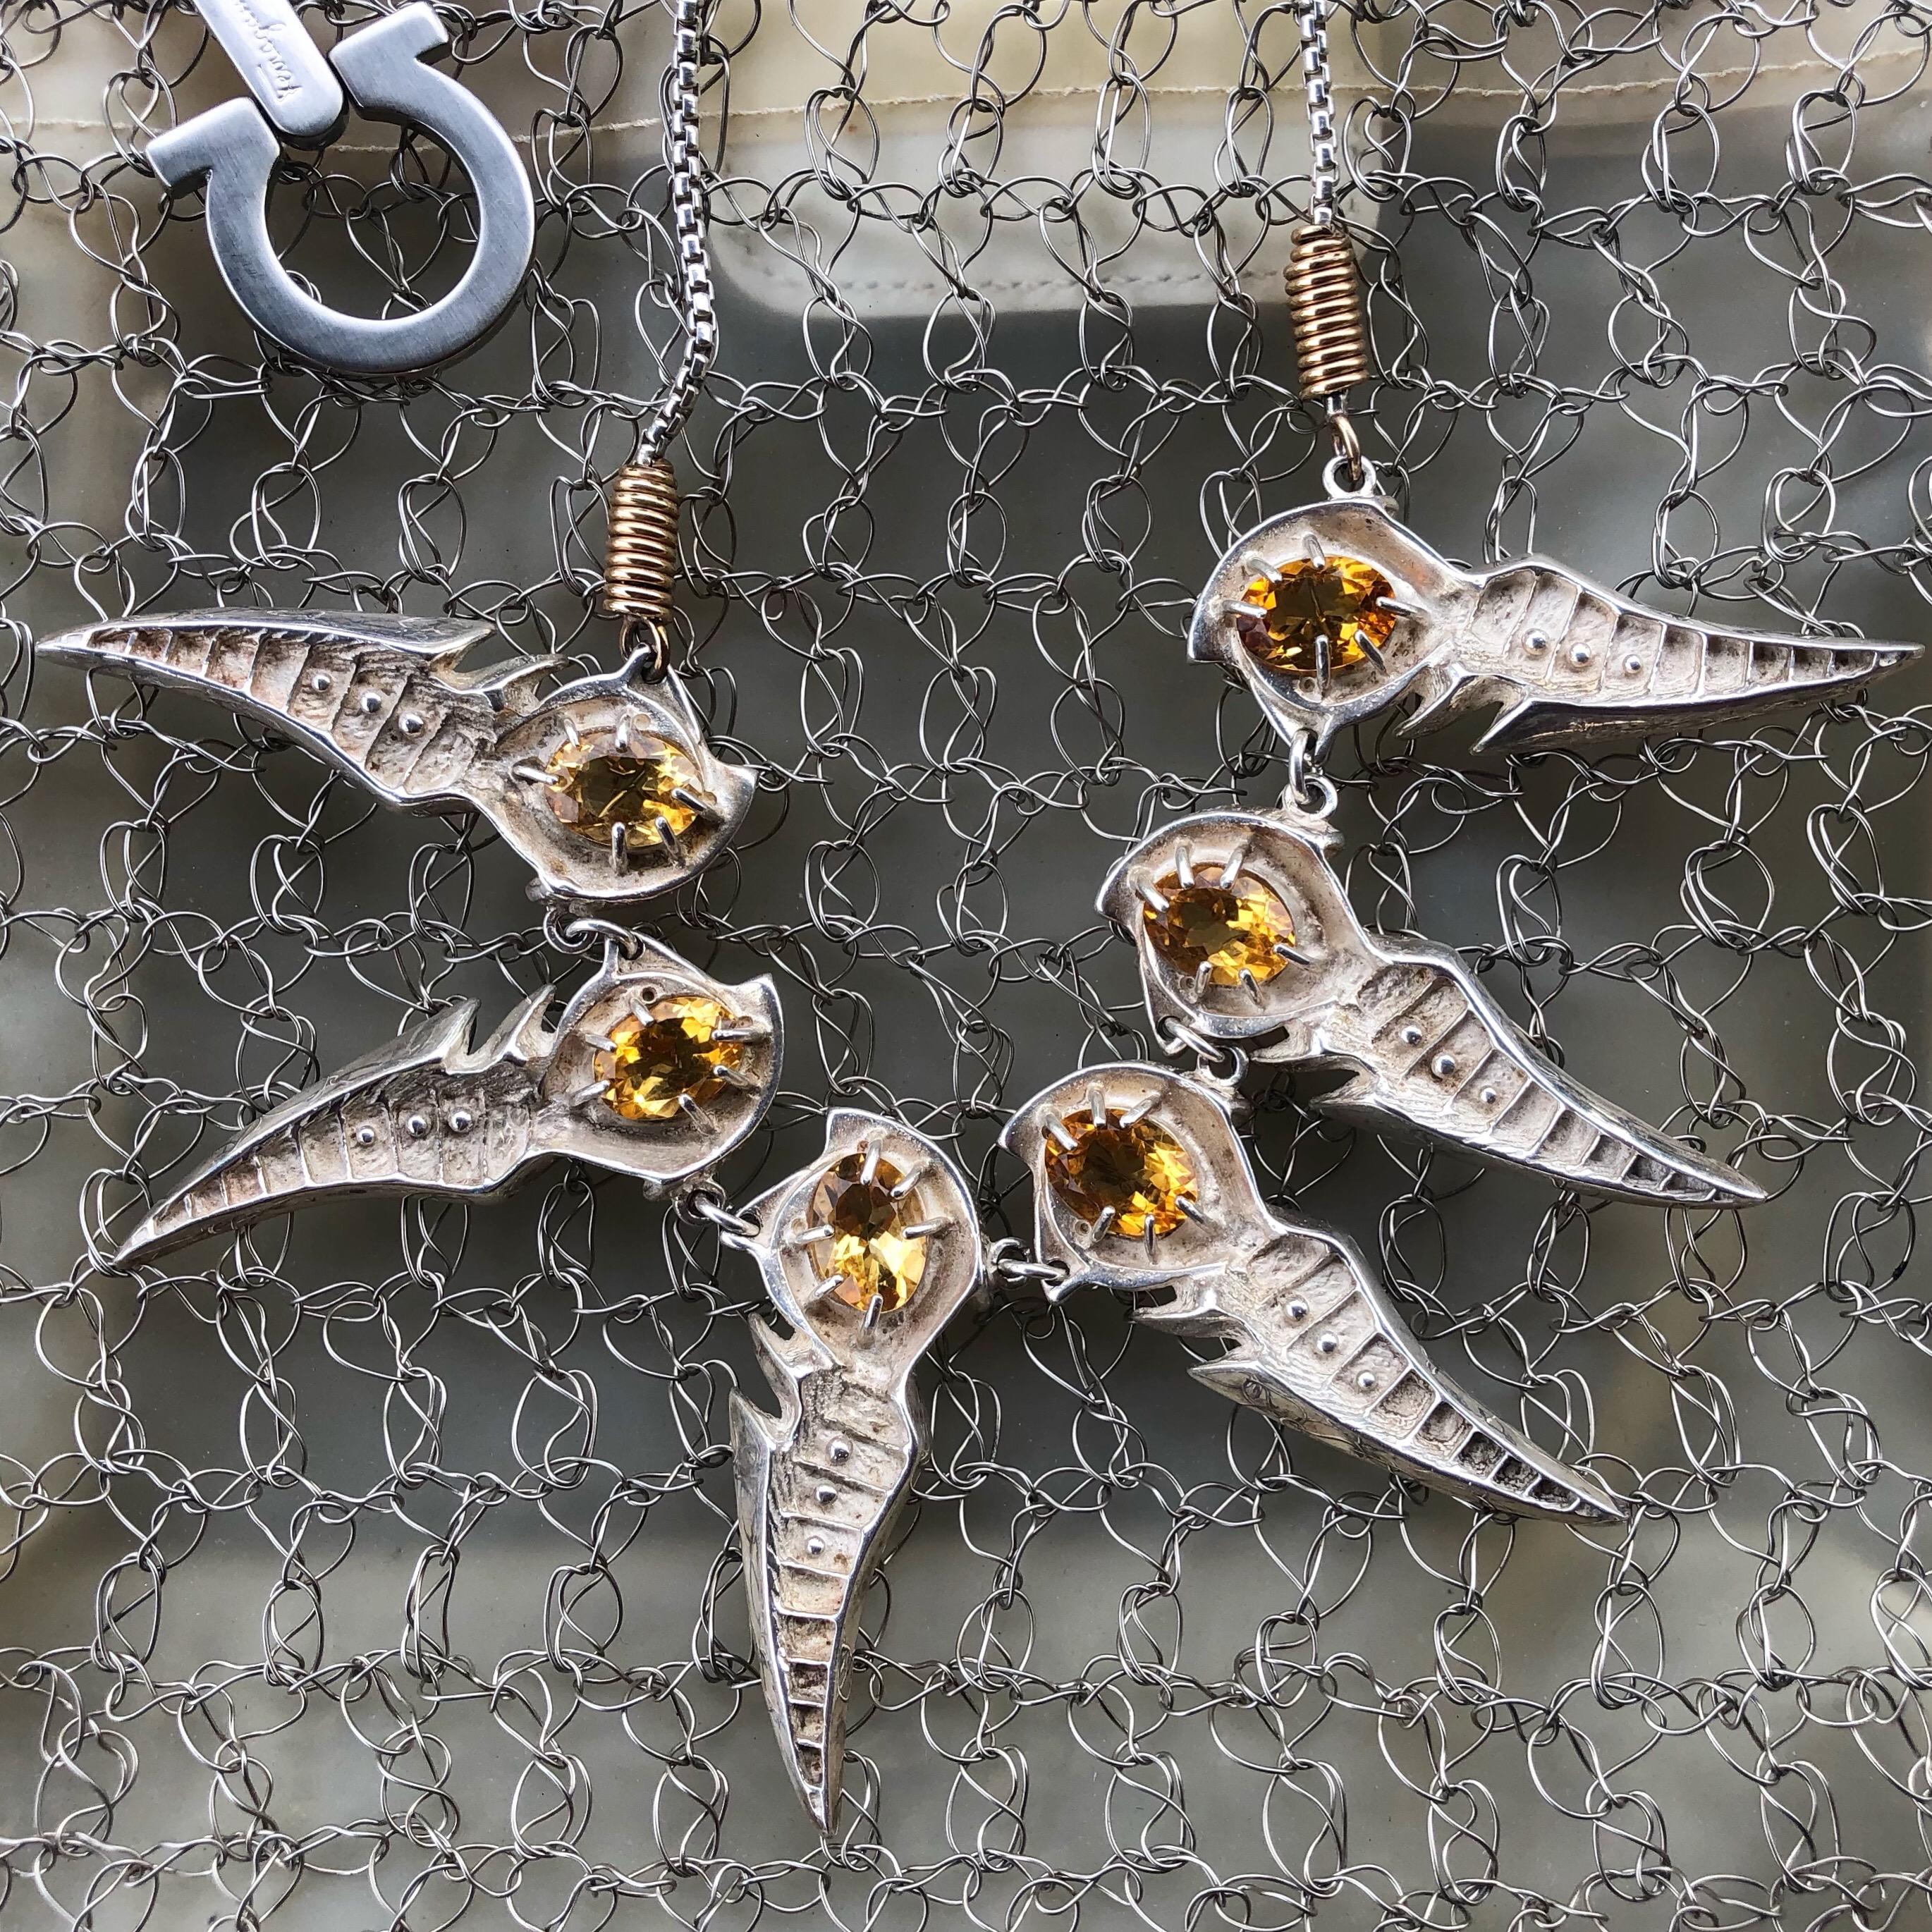 Amazing necklace to add the perfect edge to all your looks! Designed by Ray Wiley, this industrial style Silver/Brass necklace features six abstract pendants set with oval Citrine stones. Adjustable length with spring ring accents, 119.4g. The